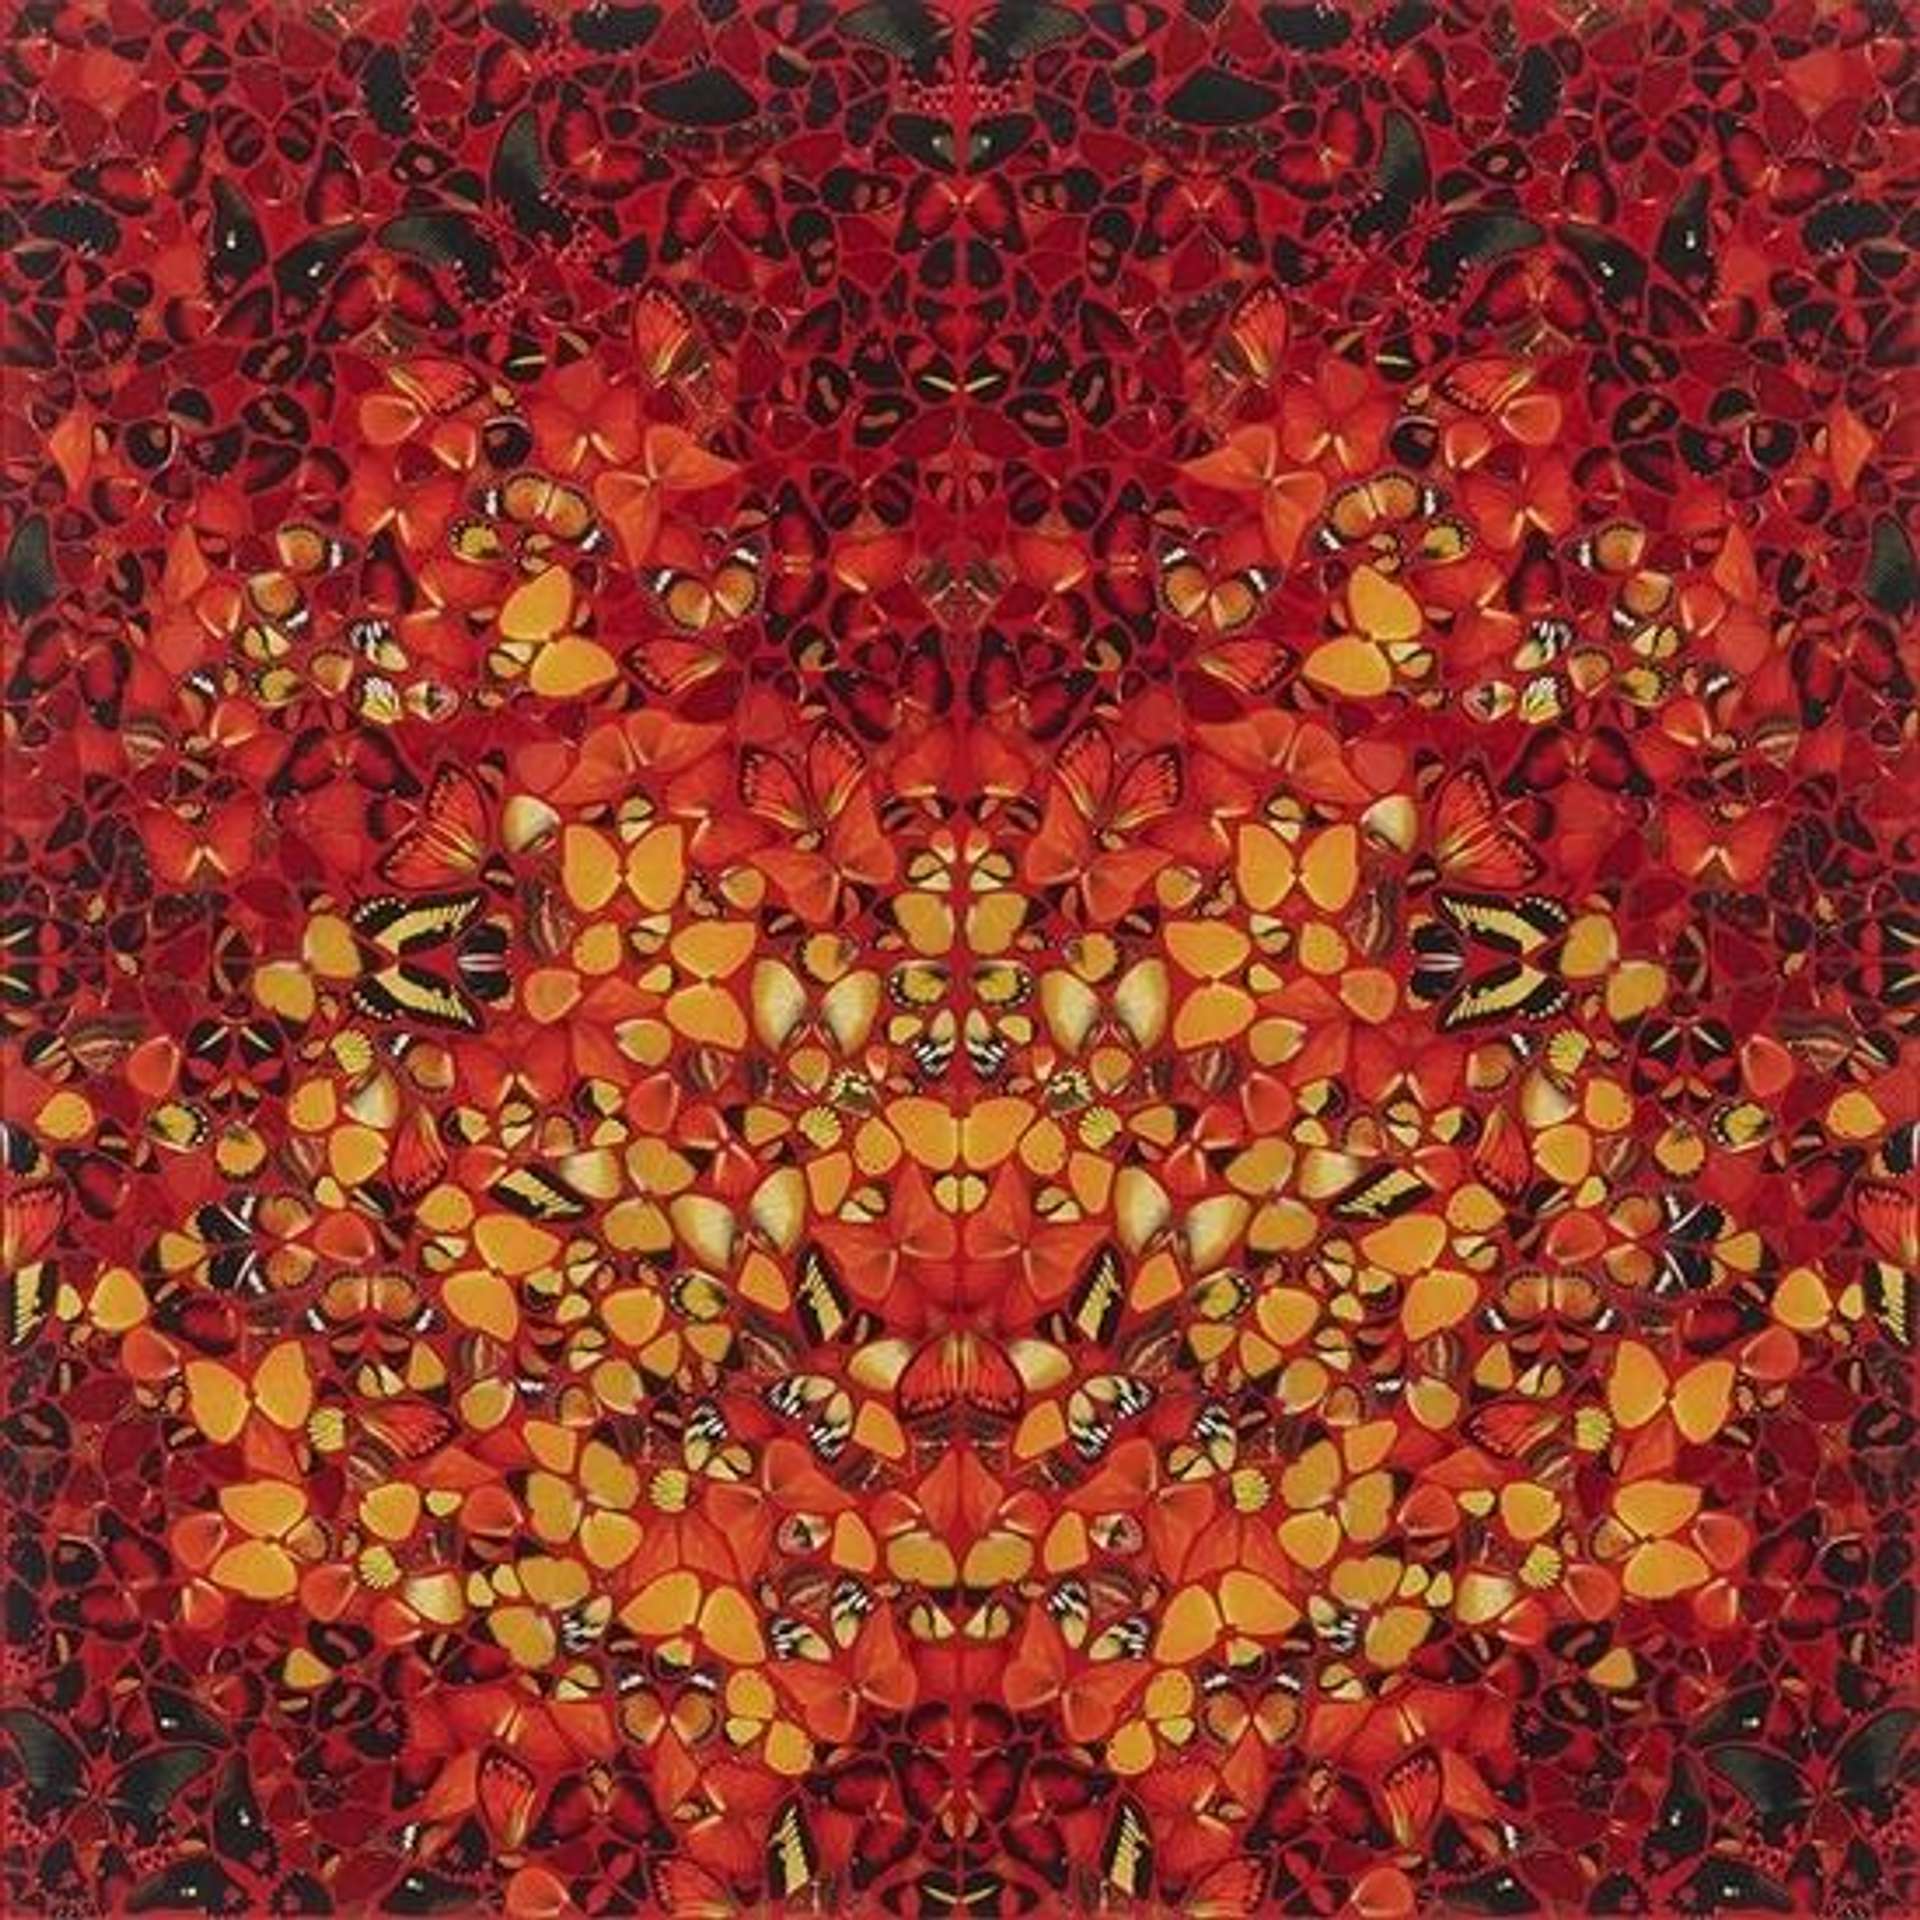 Damien Hirst’s H6-8 Fire. A giclée print of a mirrored pattern of butterflies that are yellow and black, red and black, and orange. 